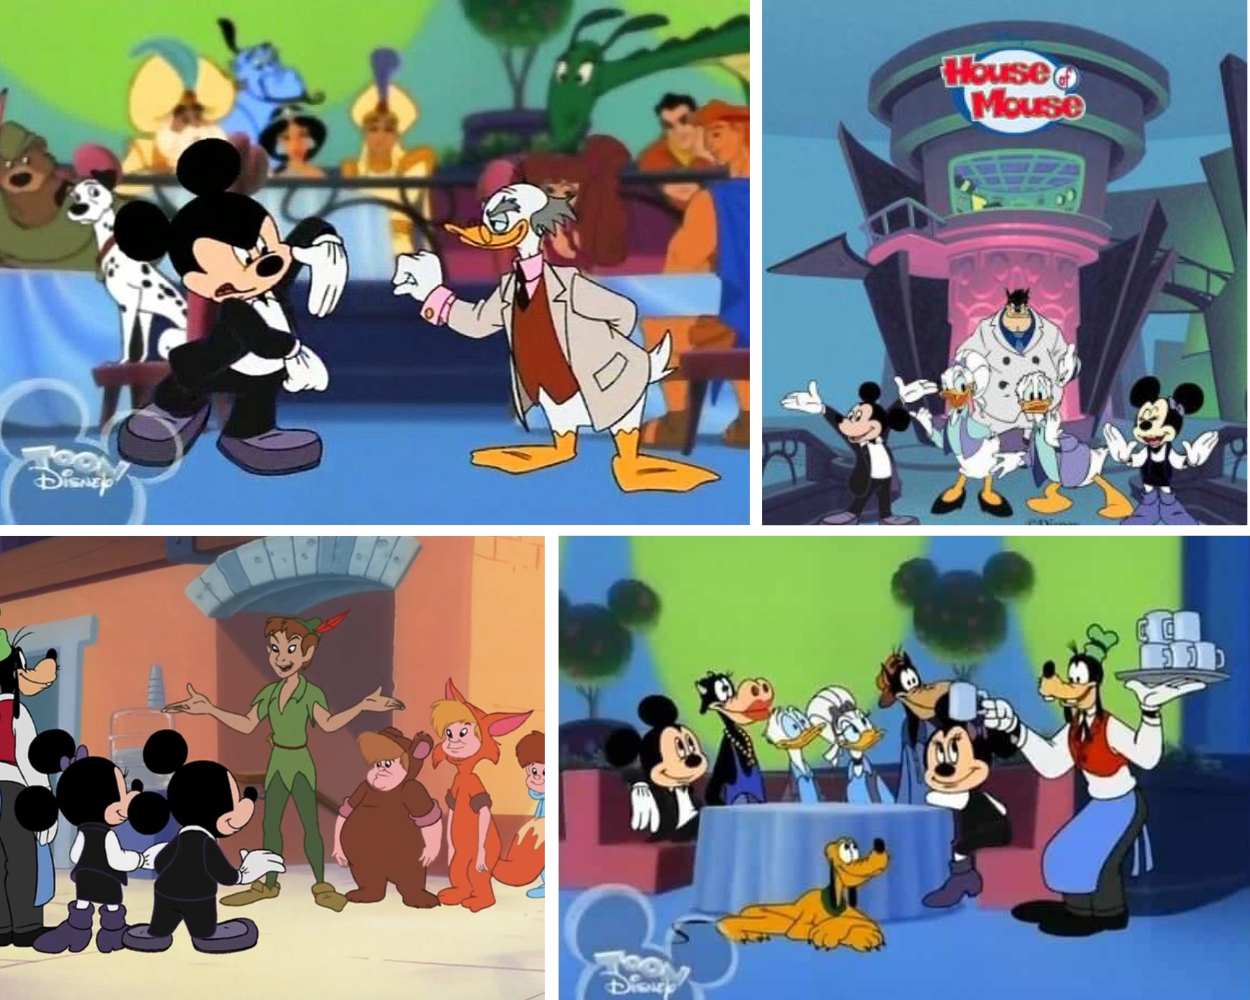 House Of Mouse (2001–2003)